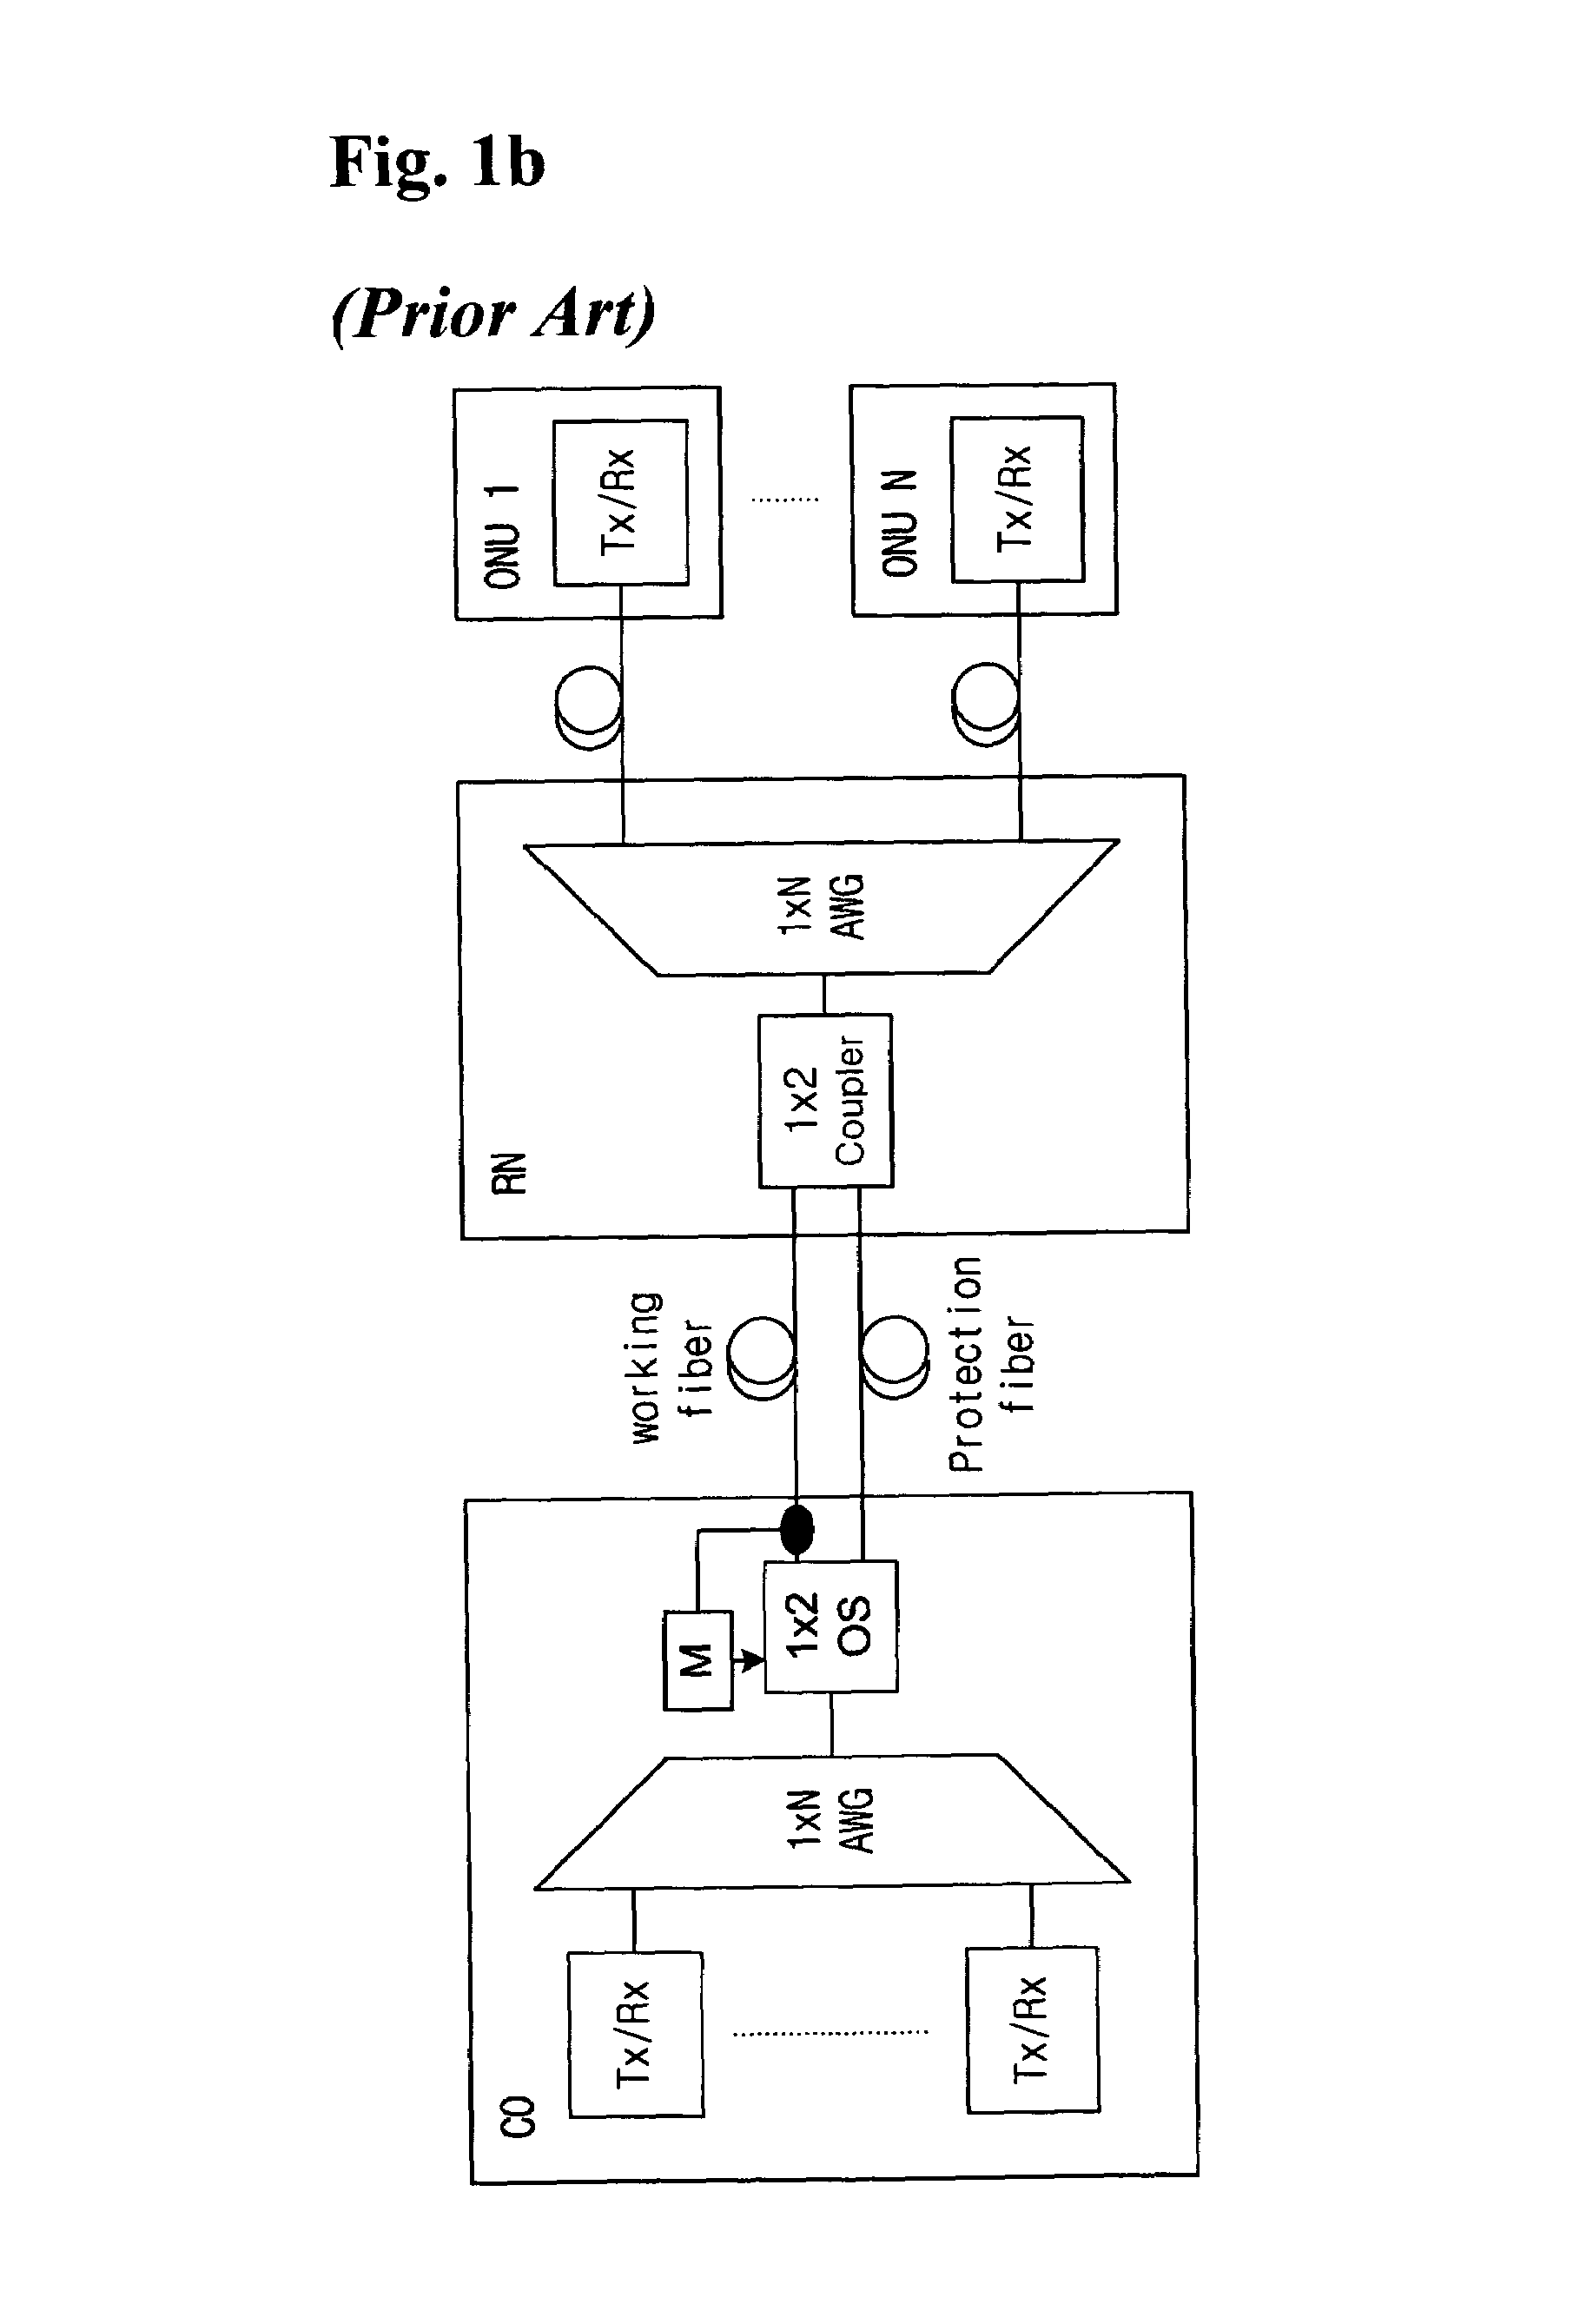 Communication recovering system for wavelength division multiplexed passive optical network